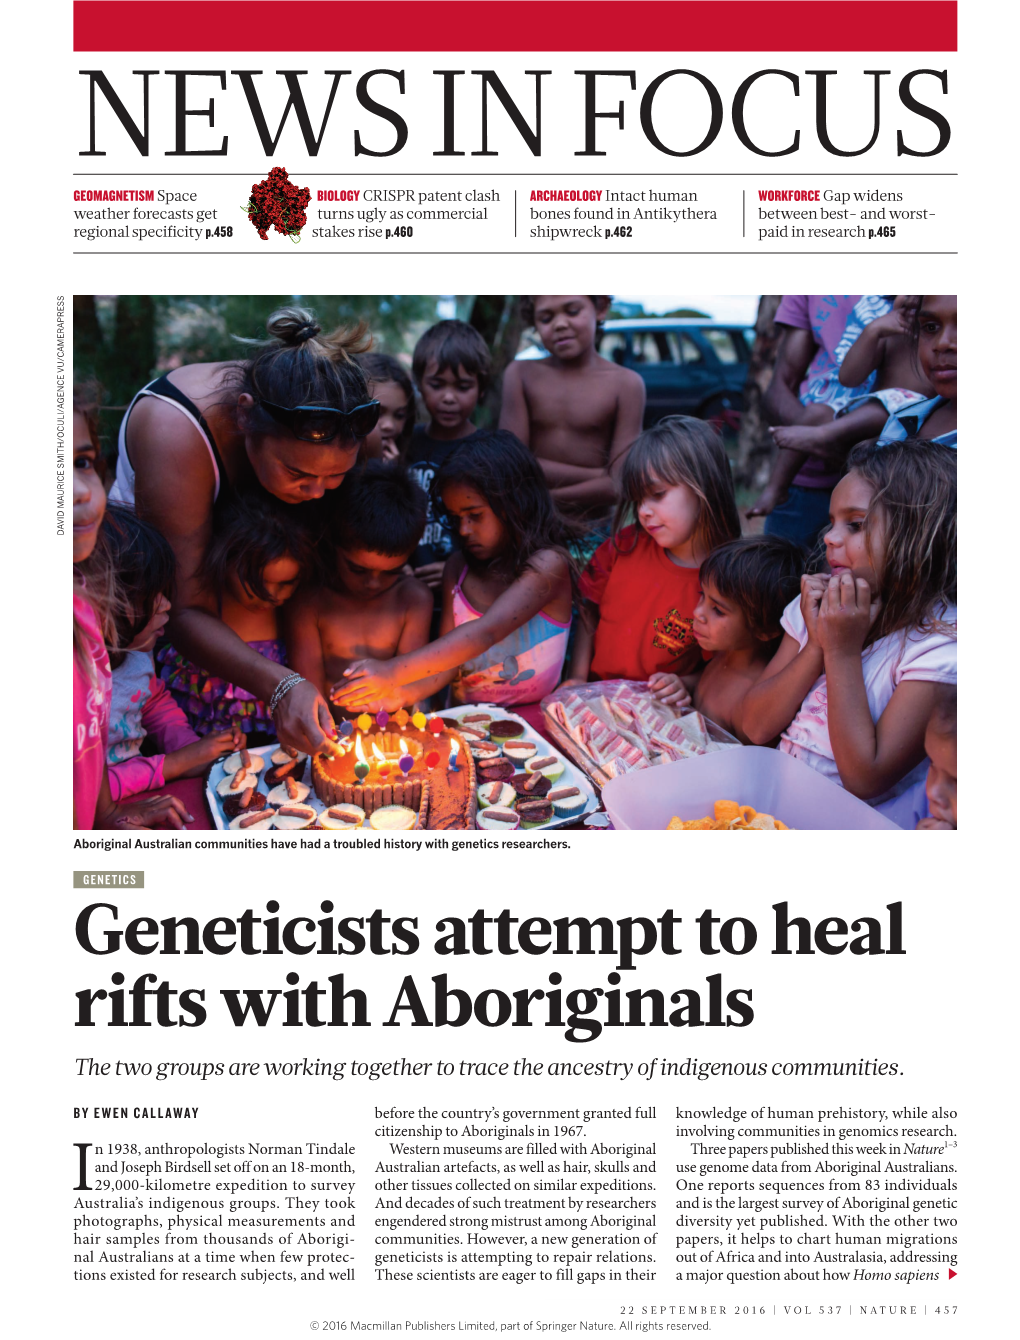 Geneticists Attempt to Heal Rifts with Aboriginals the Two Groups Are Working Together to Trace the Ancestry of Indigenous Communities